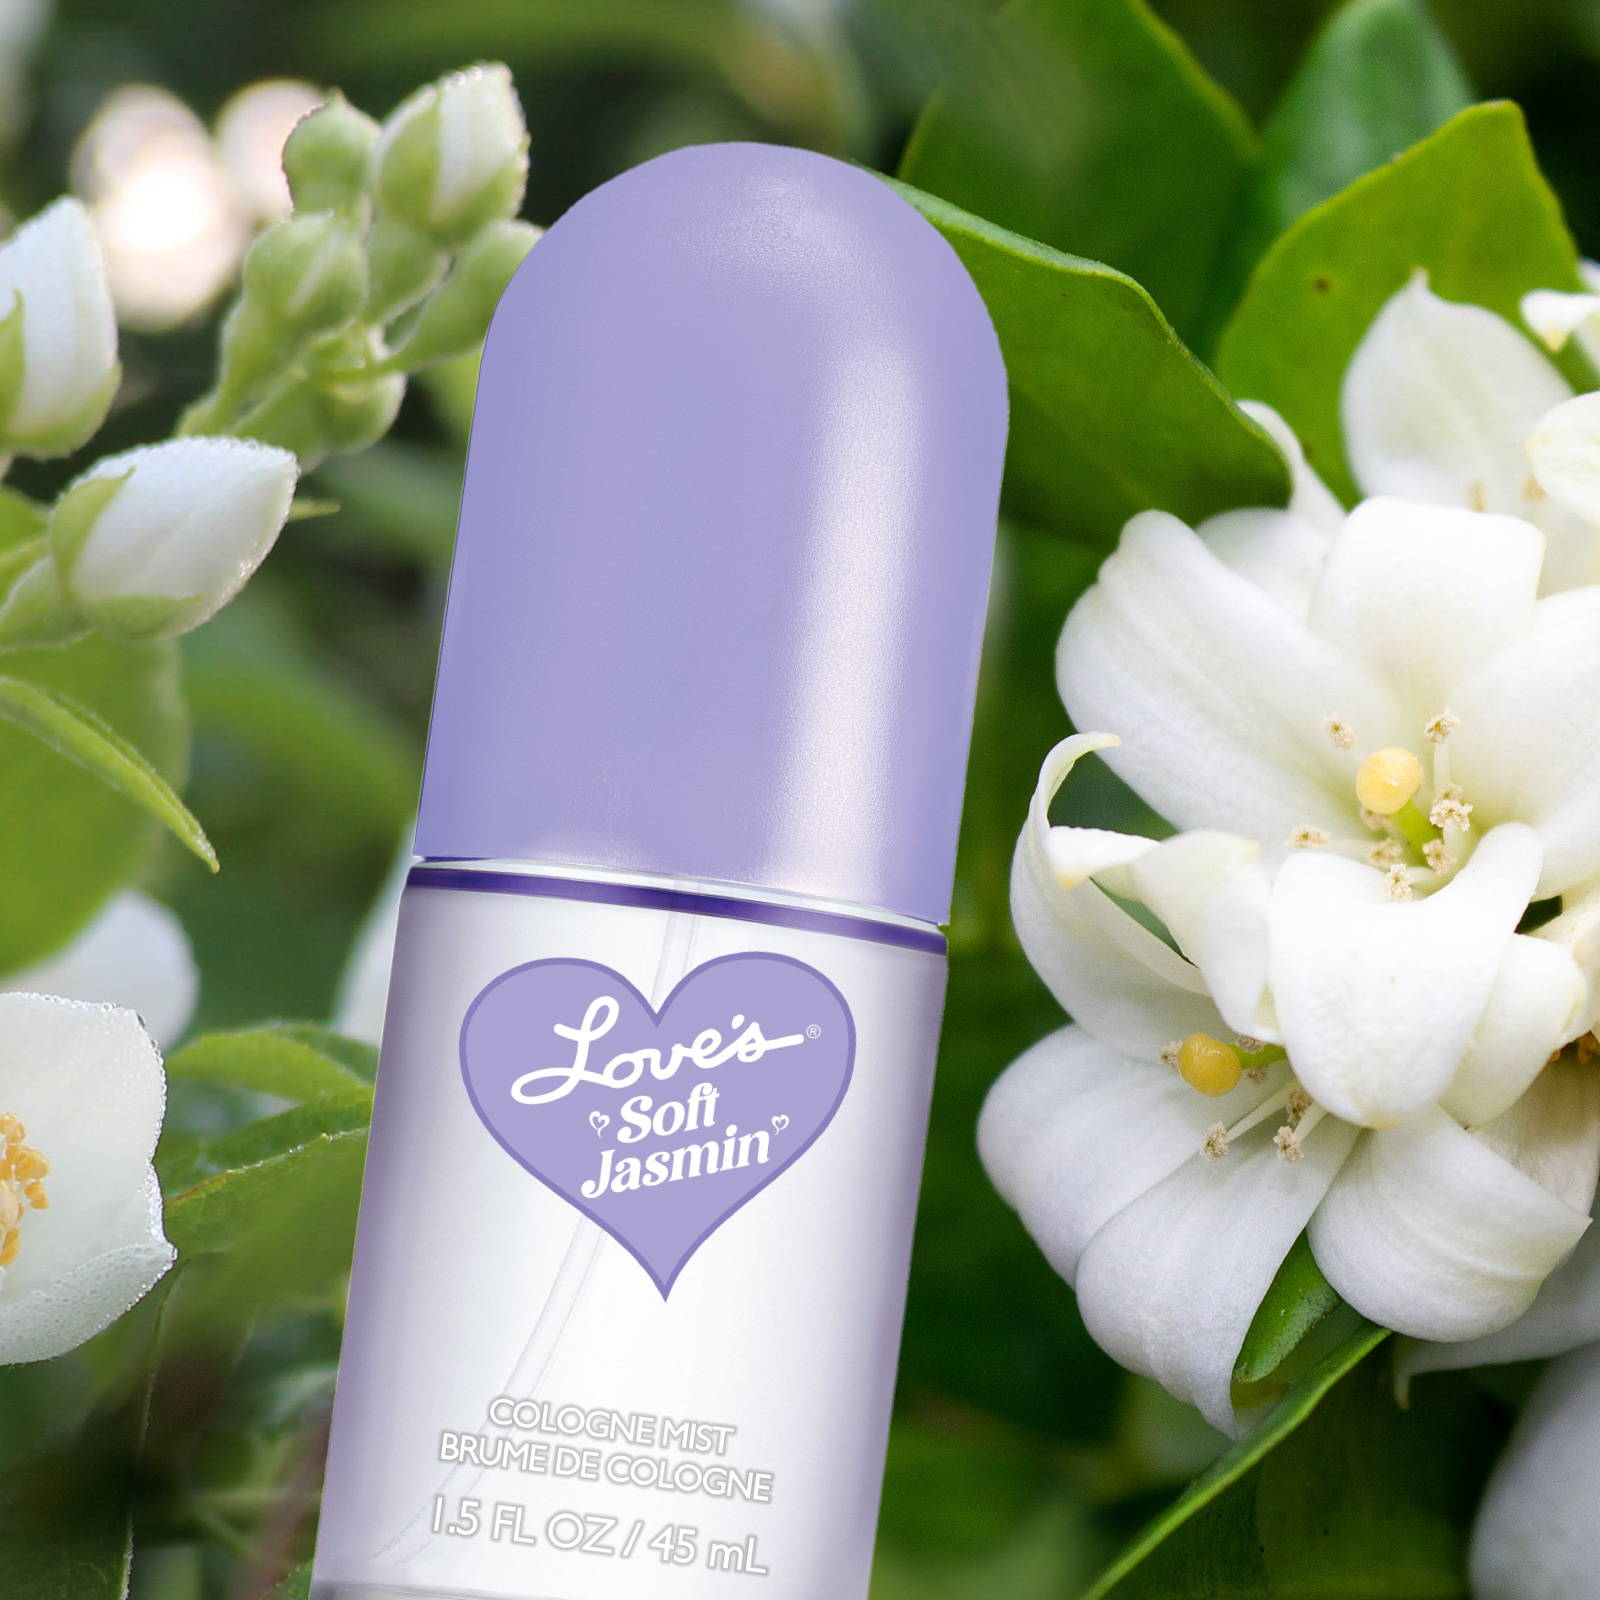 Editorial shot of Love's Soft Jasmin cologne bottle surrounded by jasmine flowers.